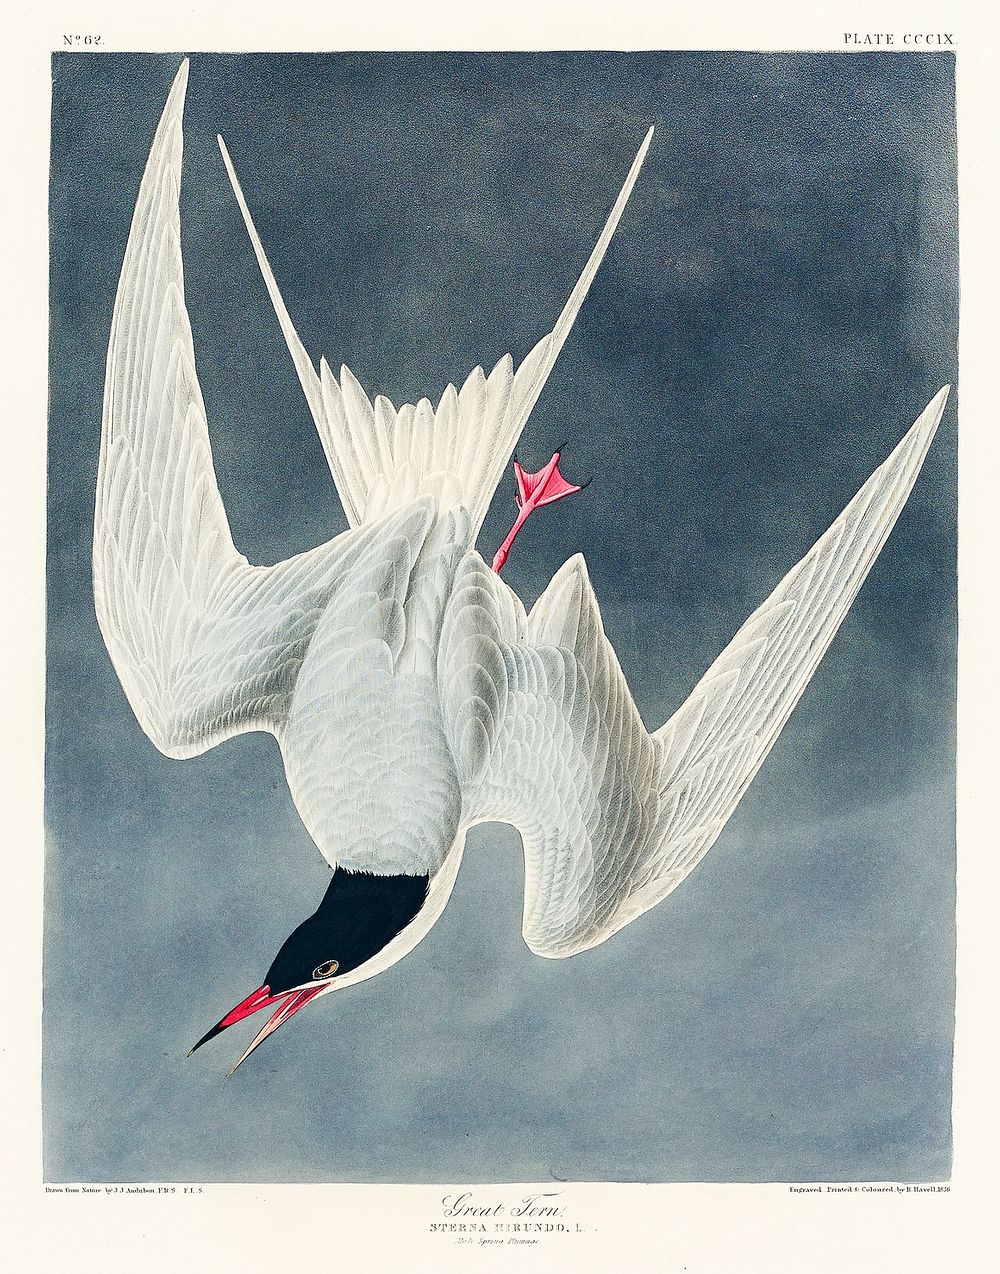 Great Tern from Birds of America (1827) by John James Audubon, etched by William Home Lizars. Original from University of…